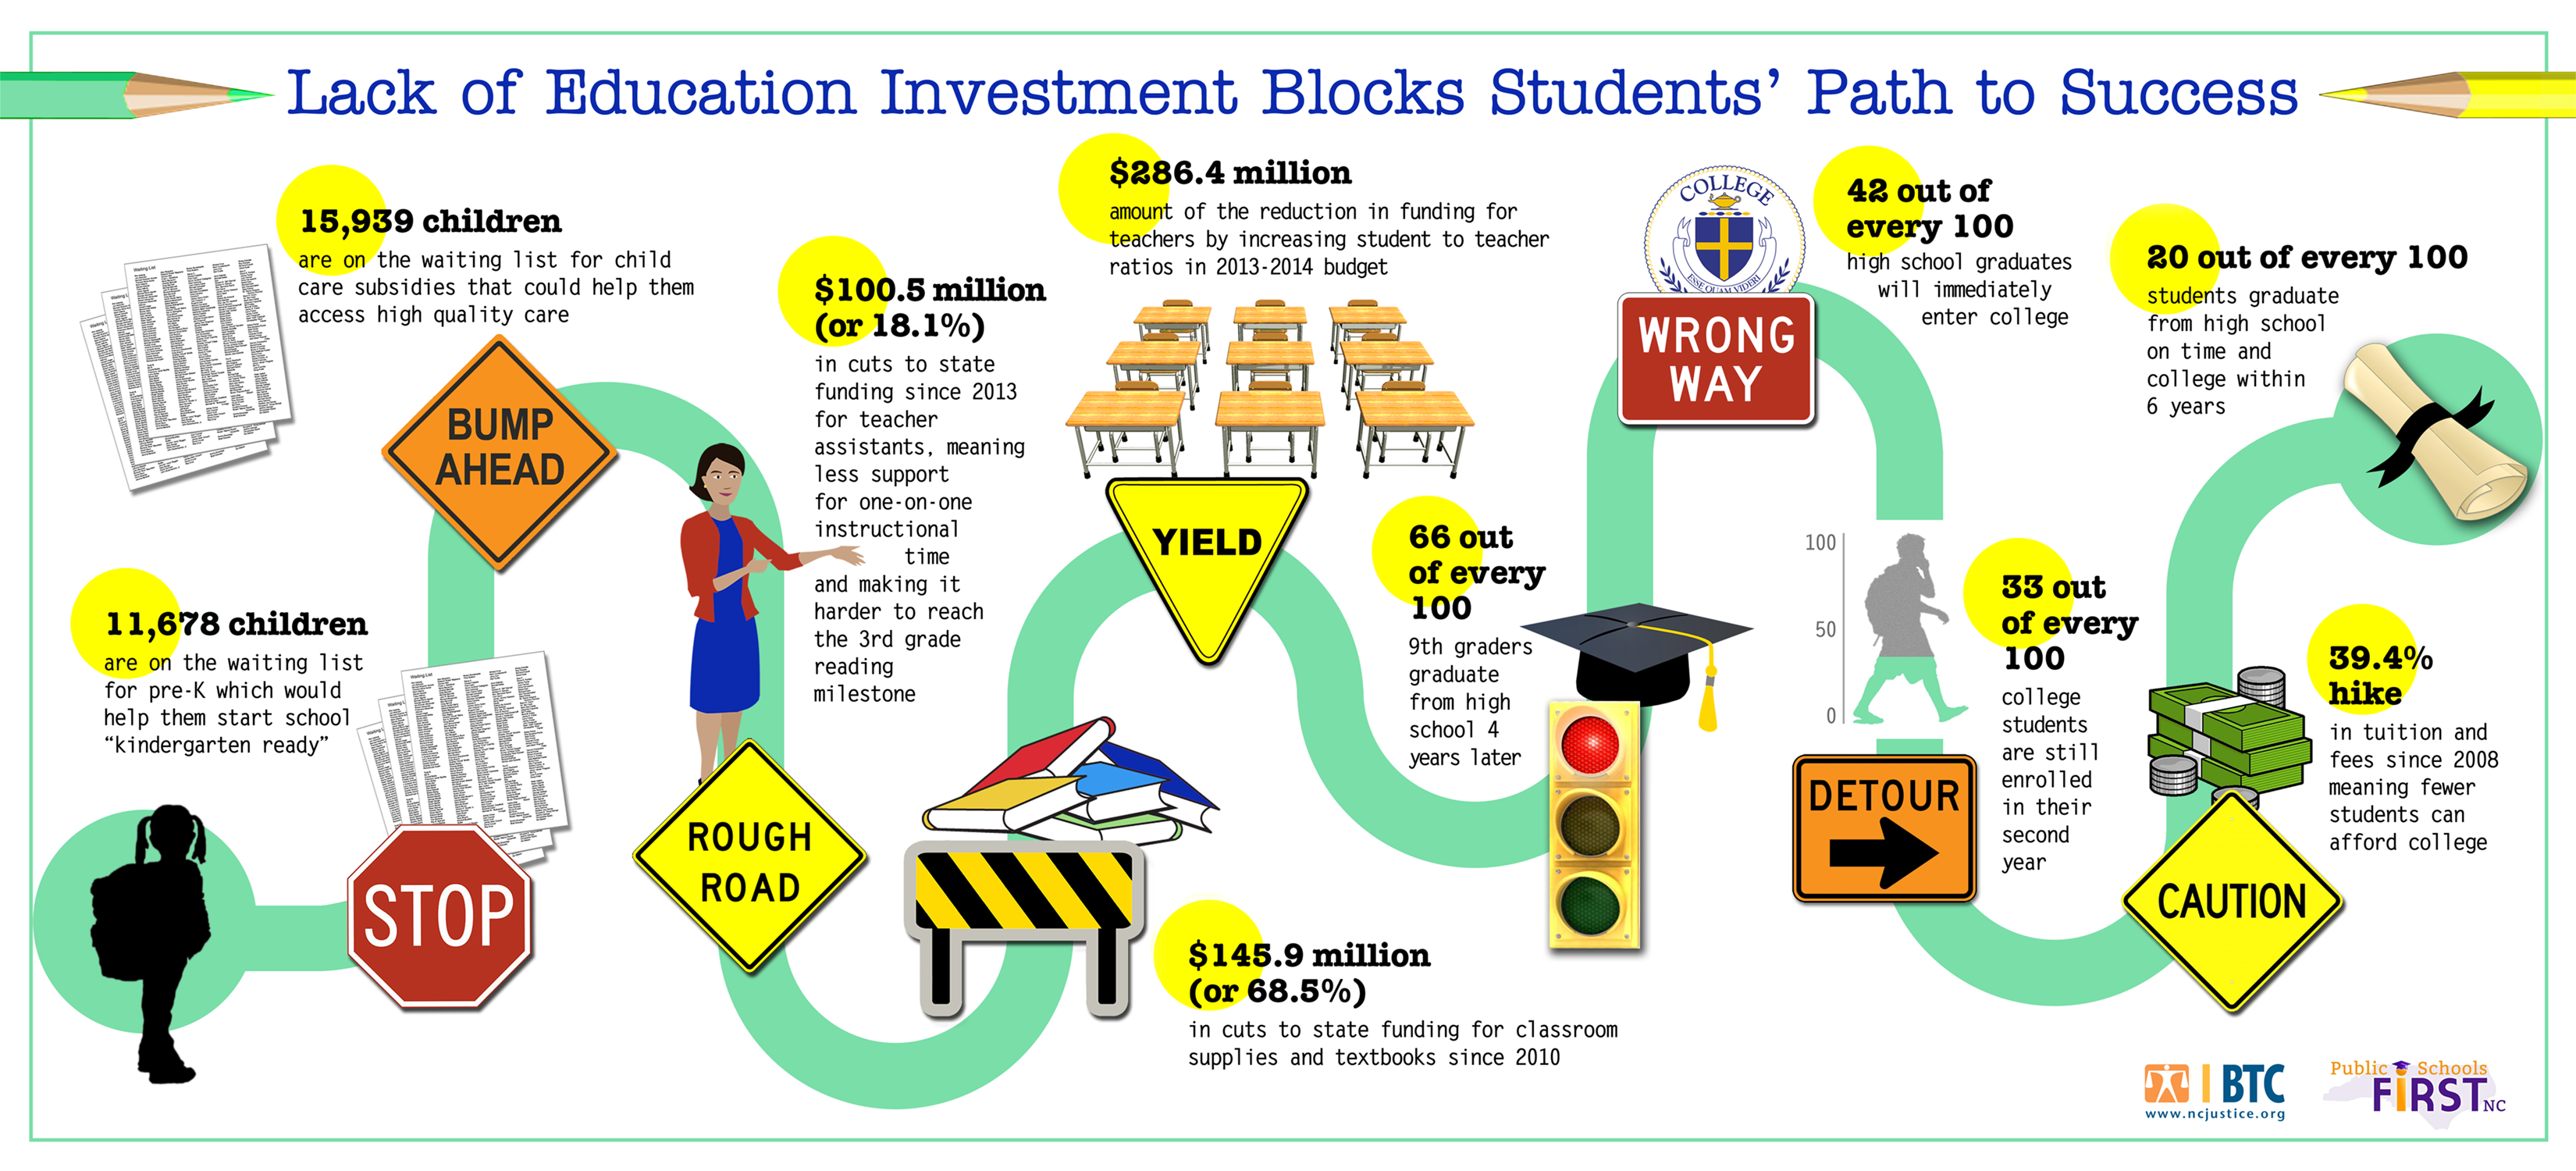 INFOGRAPHIC: Lack of Education Investment Blocks Students' Path to ...